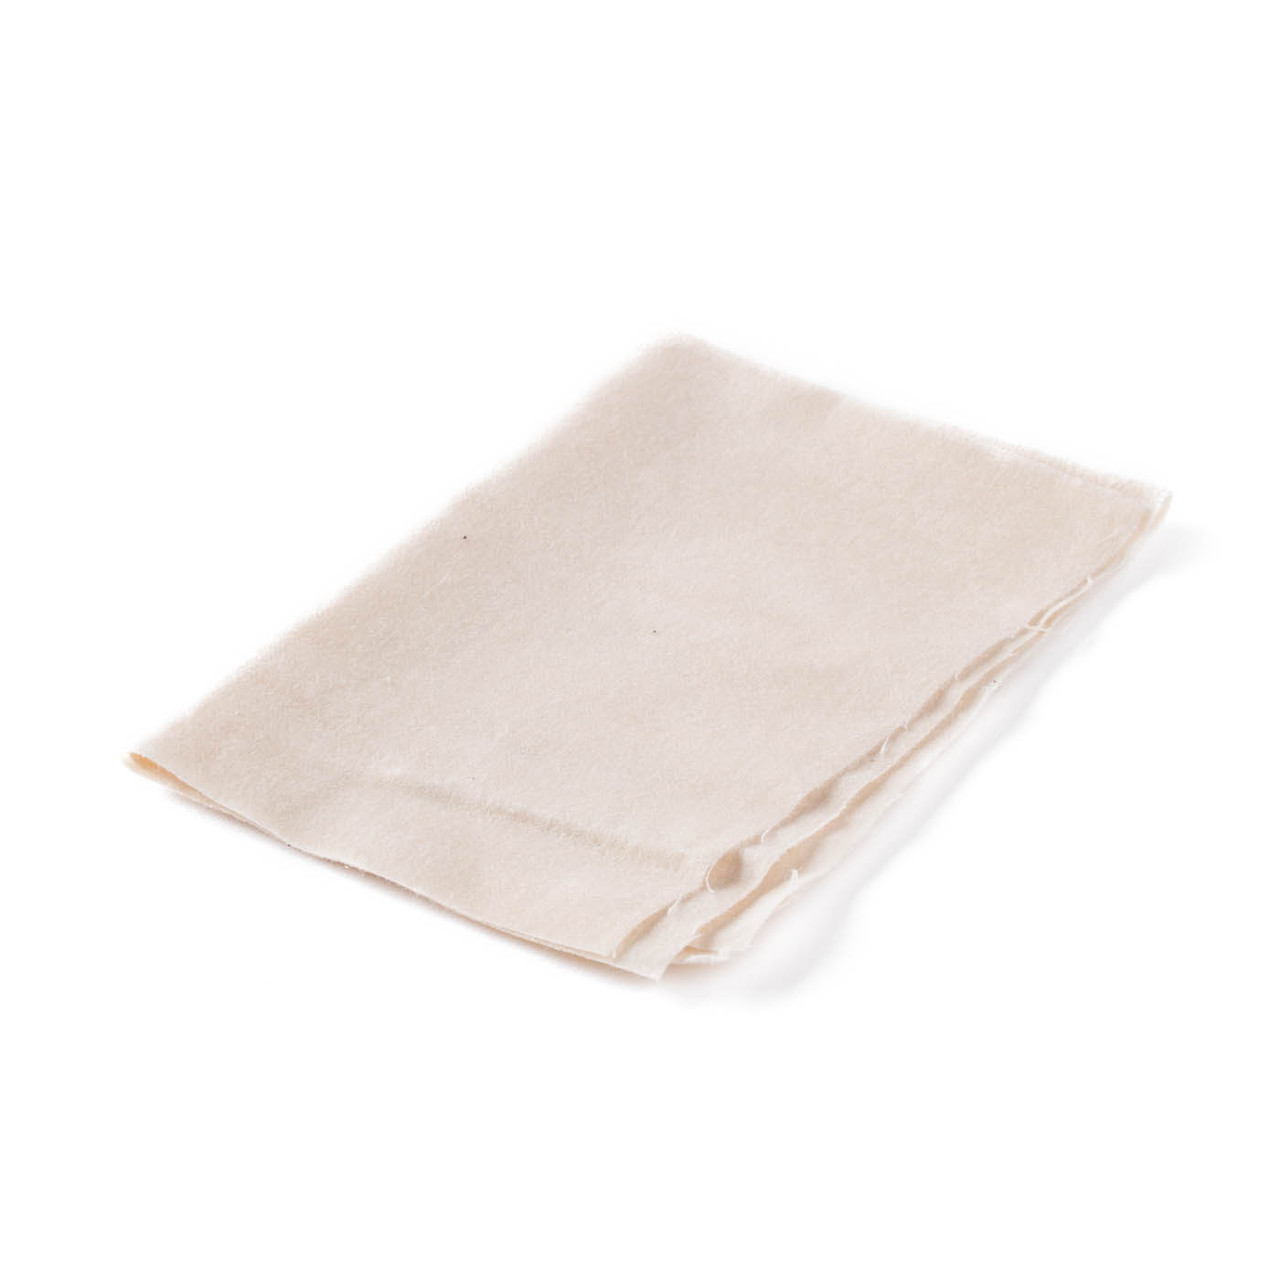 Herco Miracle Polishing Cloth for Brass, Gold & Silver Plated